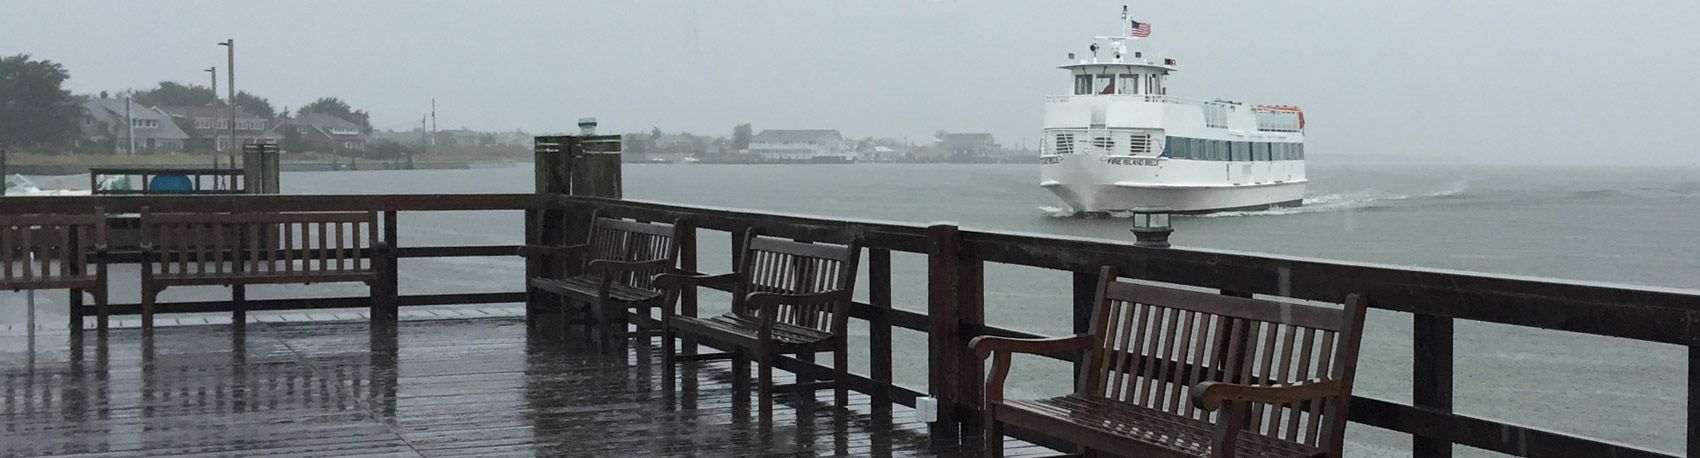 Ferry Arriving in the Rain